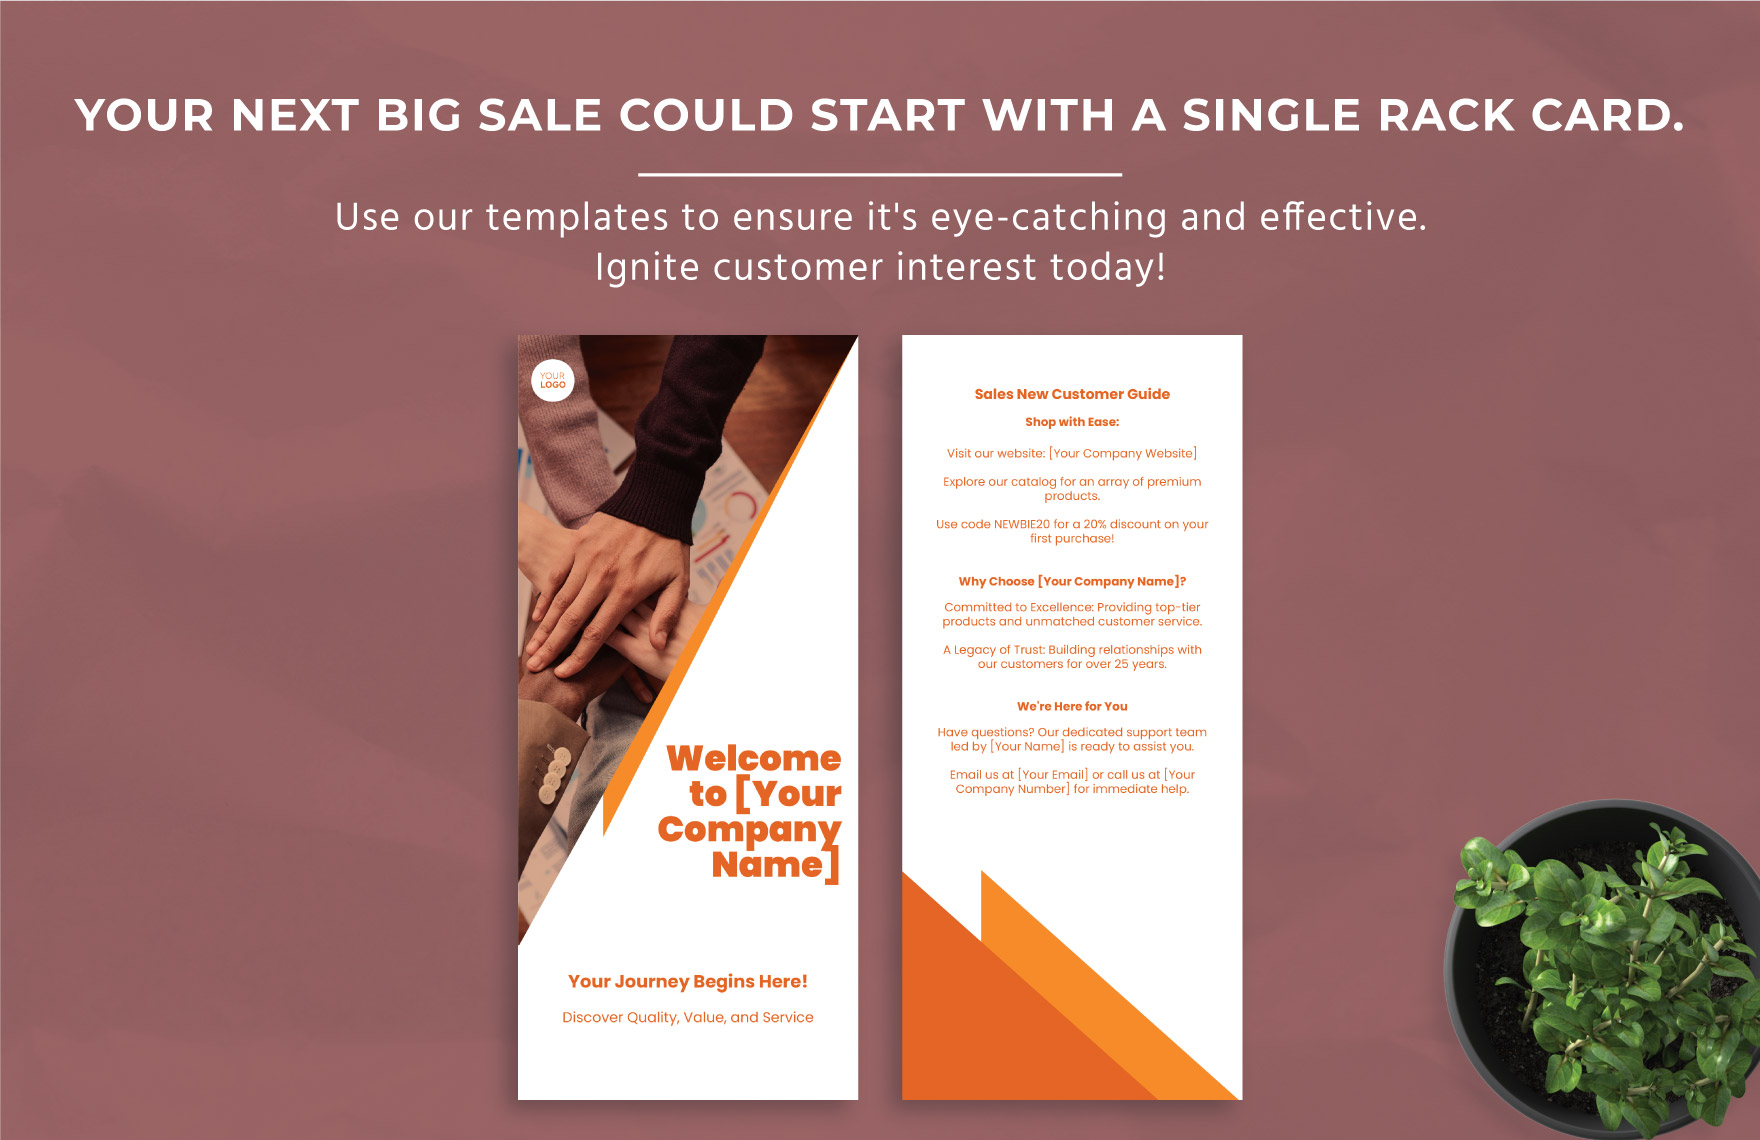 Sales New Customer Guide Rack Card Template